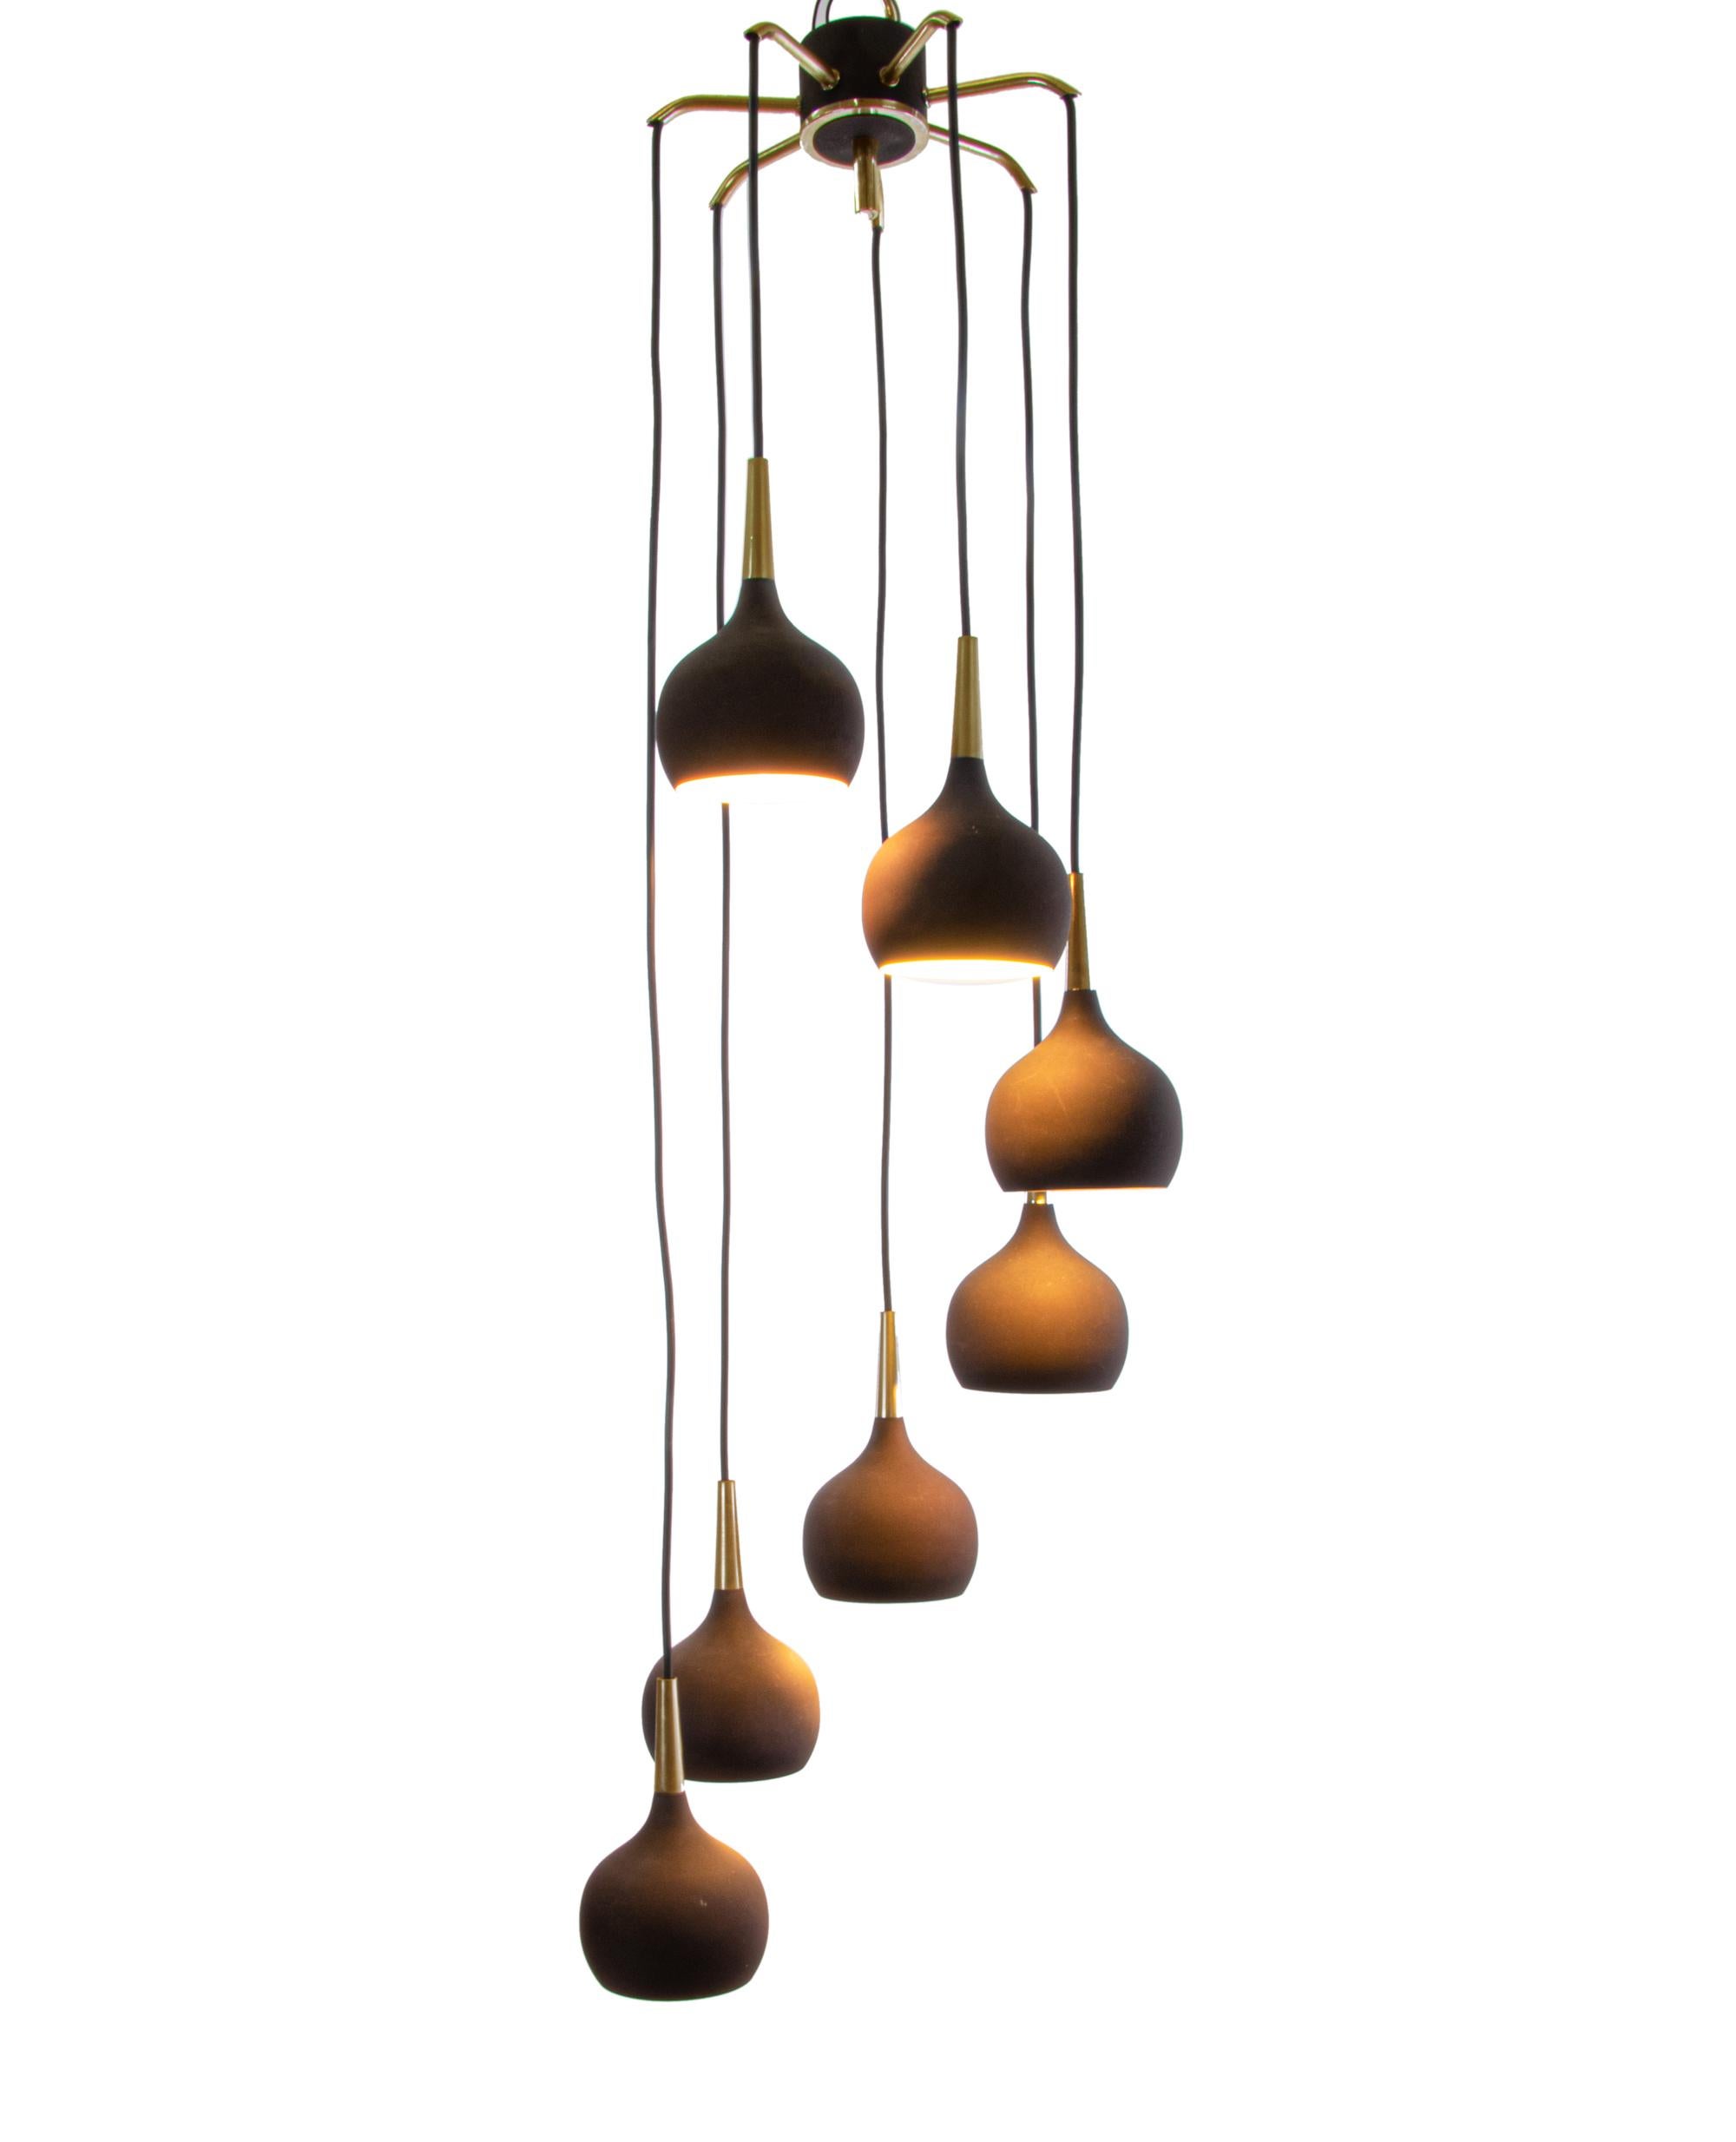 Elegant dome pendant light with seven drop-shaped shades in dark-brown metal with brass mounting. With this light you make a clear statement in your interior design. A real eye-catcher even unlit. Designed by Hans-Agne Jakobsson (1919-2009) for AB